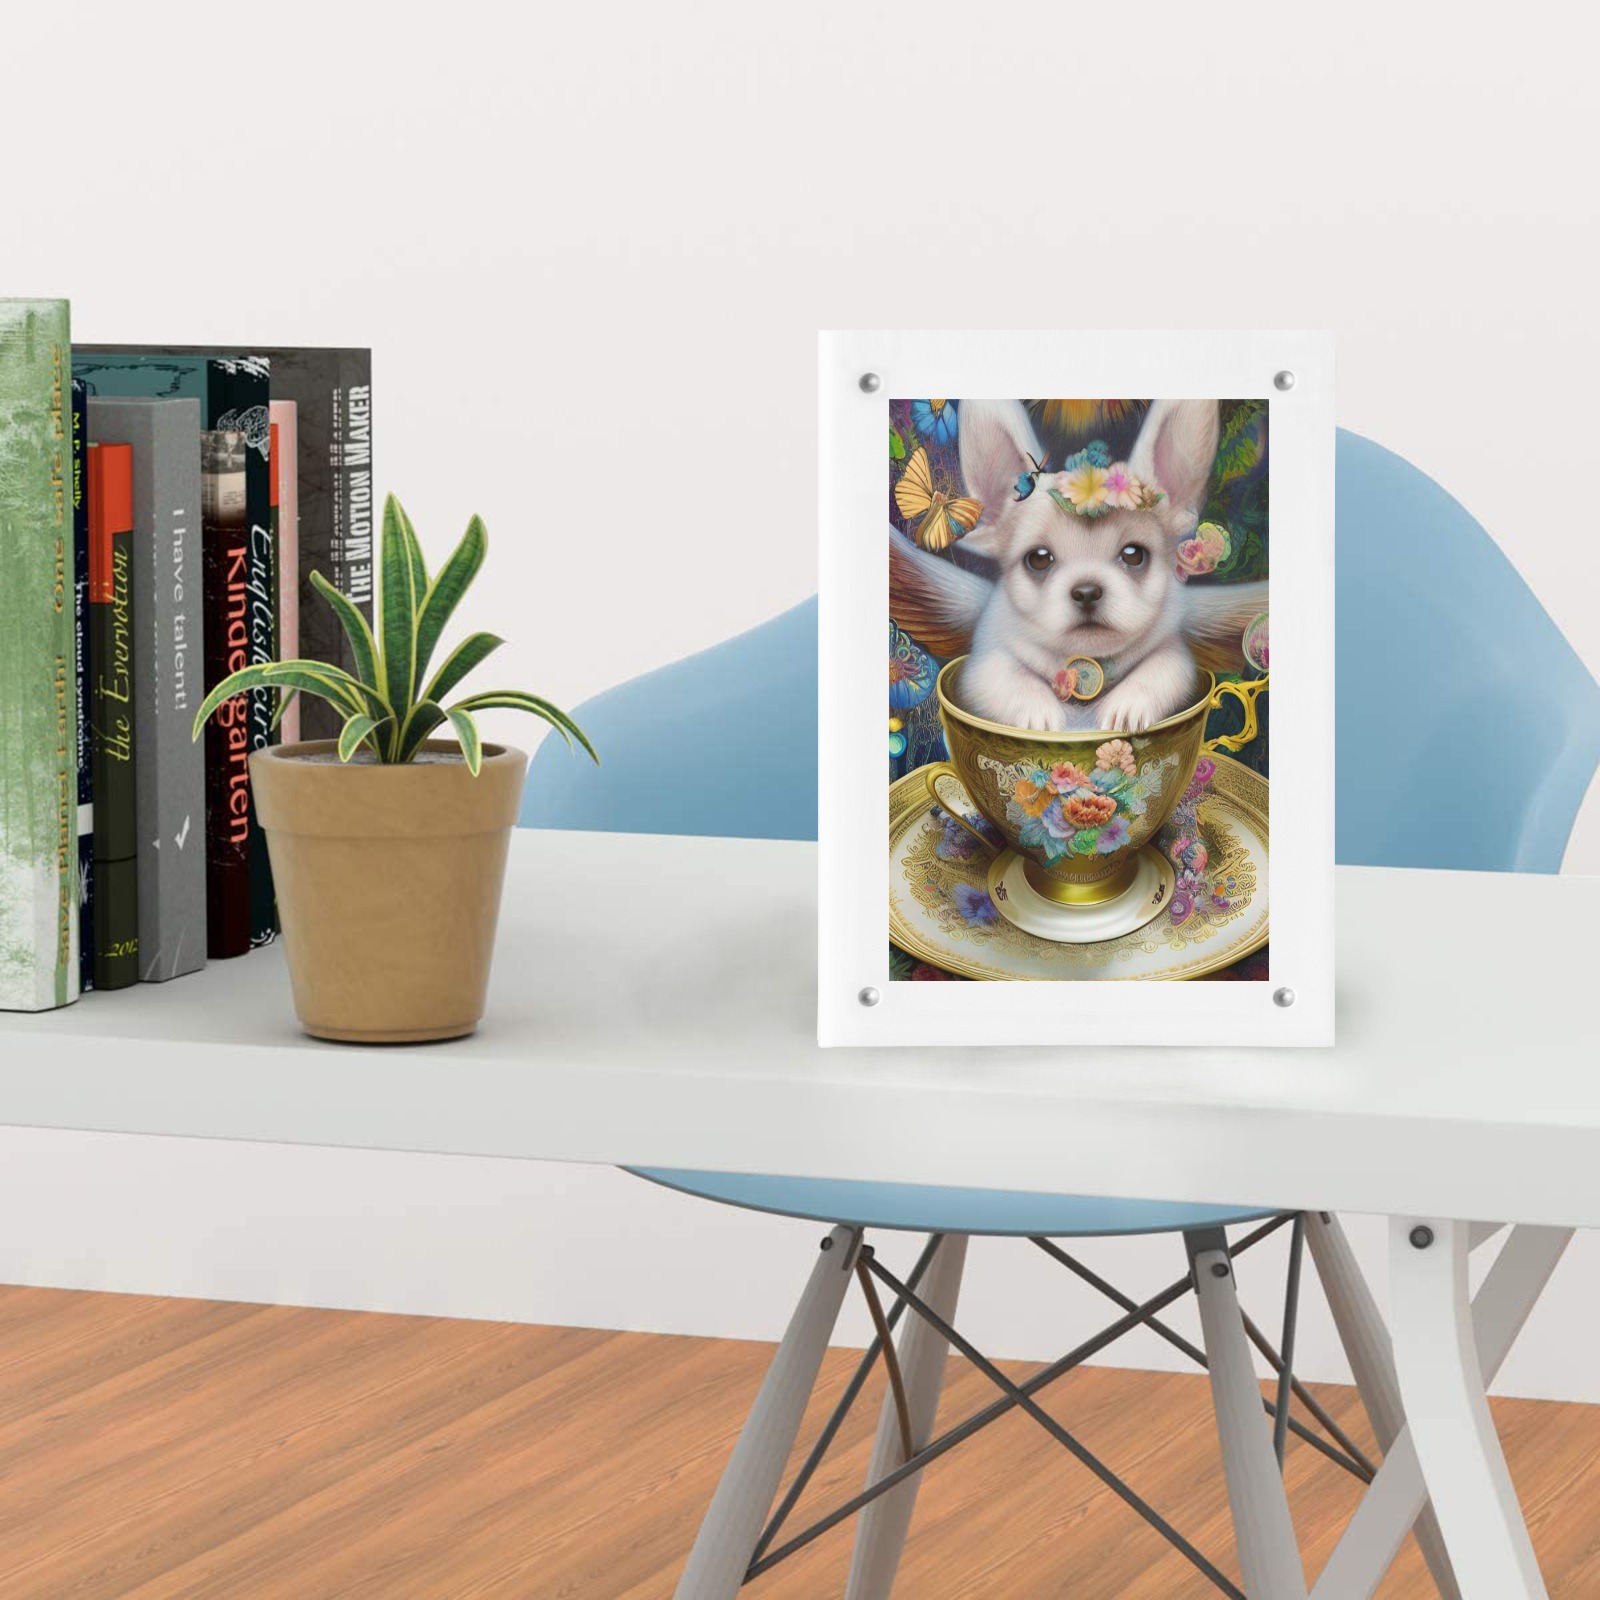 Teacups Puppies 8 Acrylic Magnetic Photo Frame 5"x7"